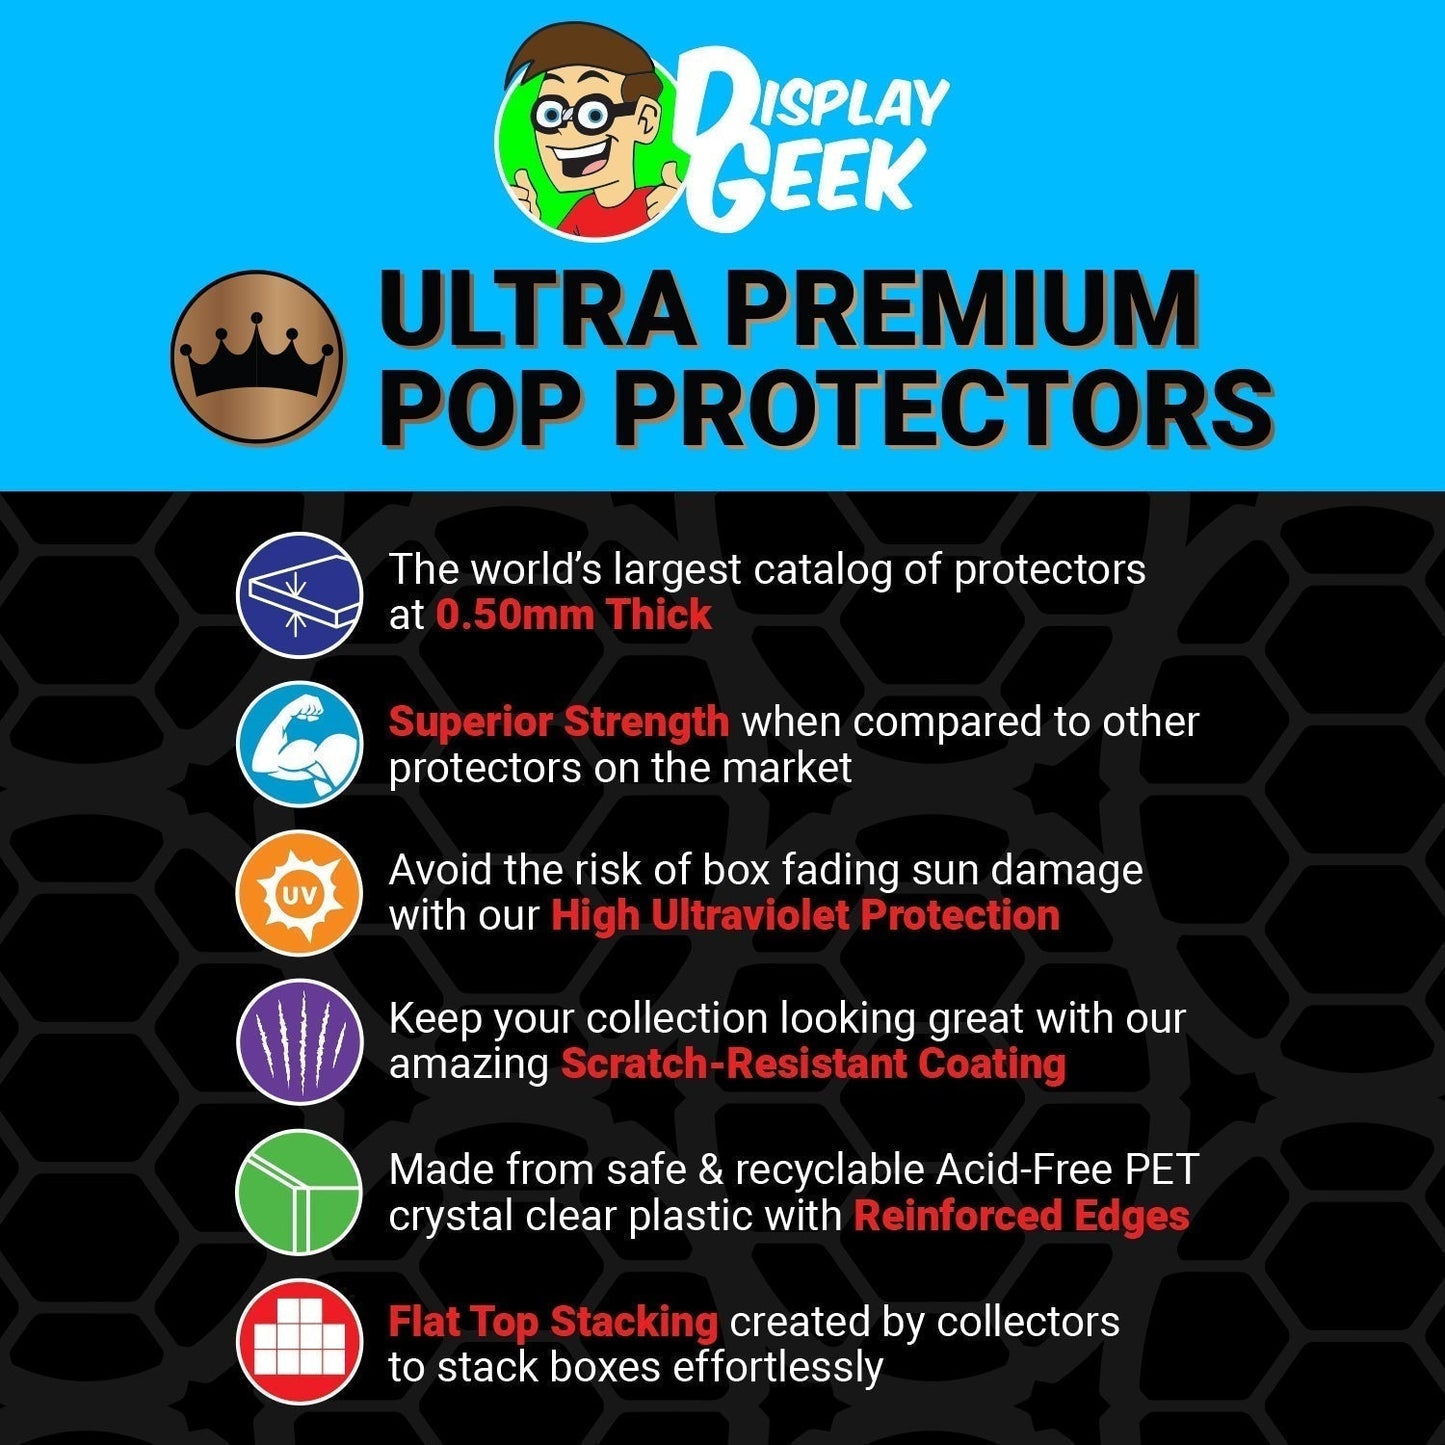 Pop Protector for Funkoverse Peter Pan 100 Funko 2 Pack - PPG Pop Protector Guide Search Created by Display Geek